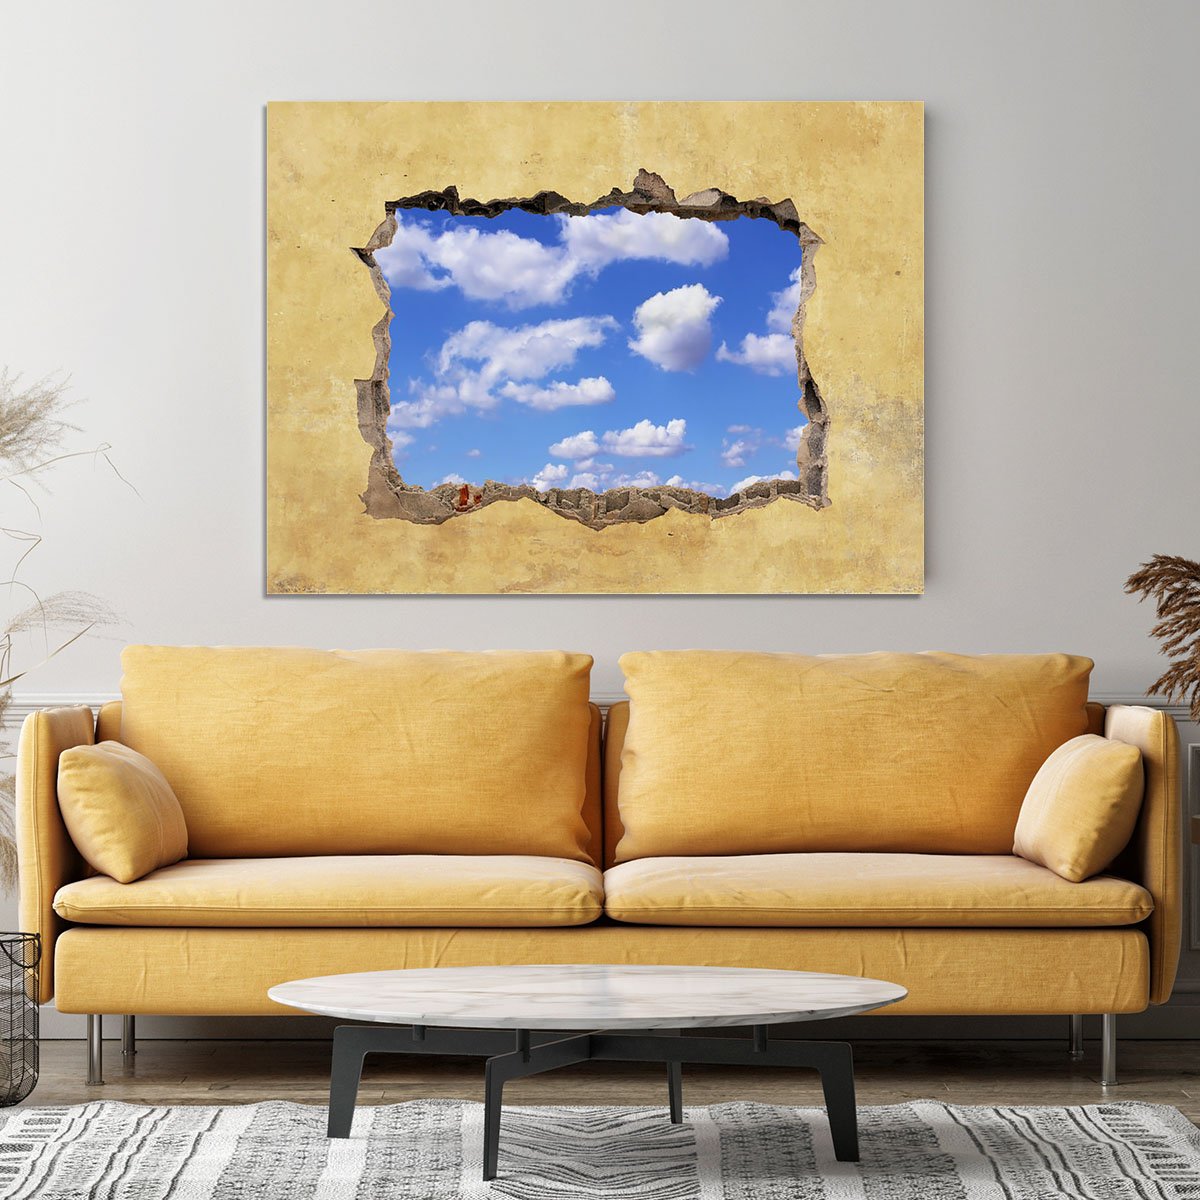 A Hole in a Wall with Blue Sky Canvas Print or Poster